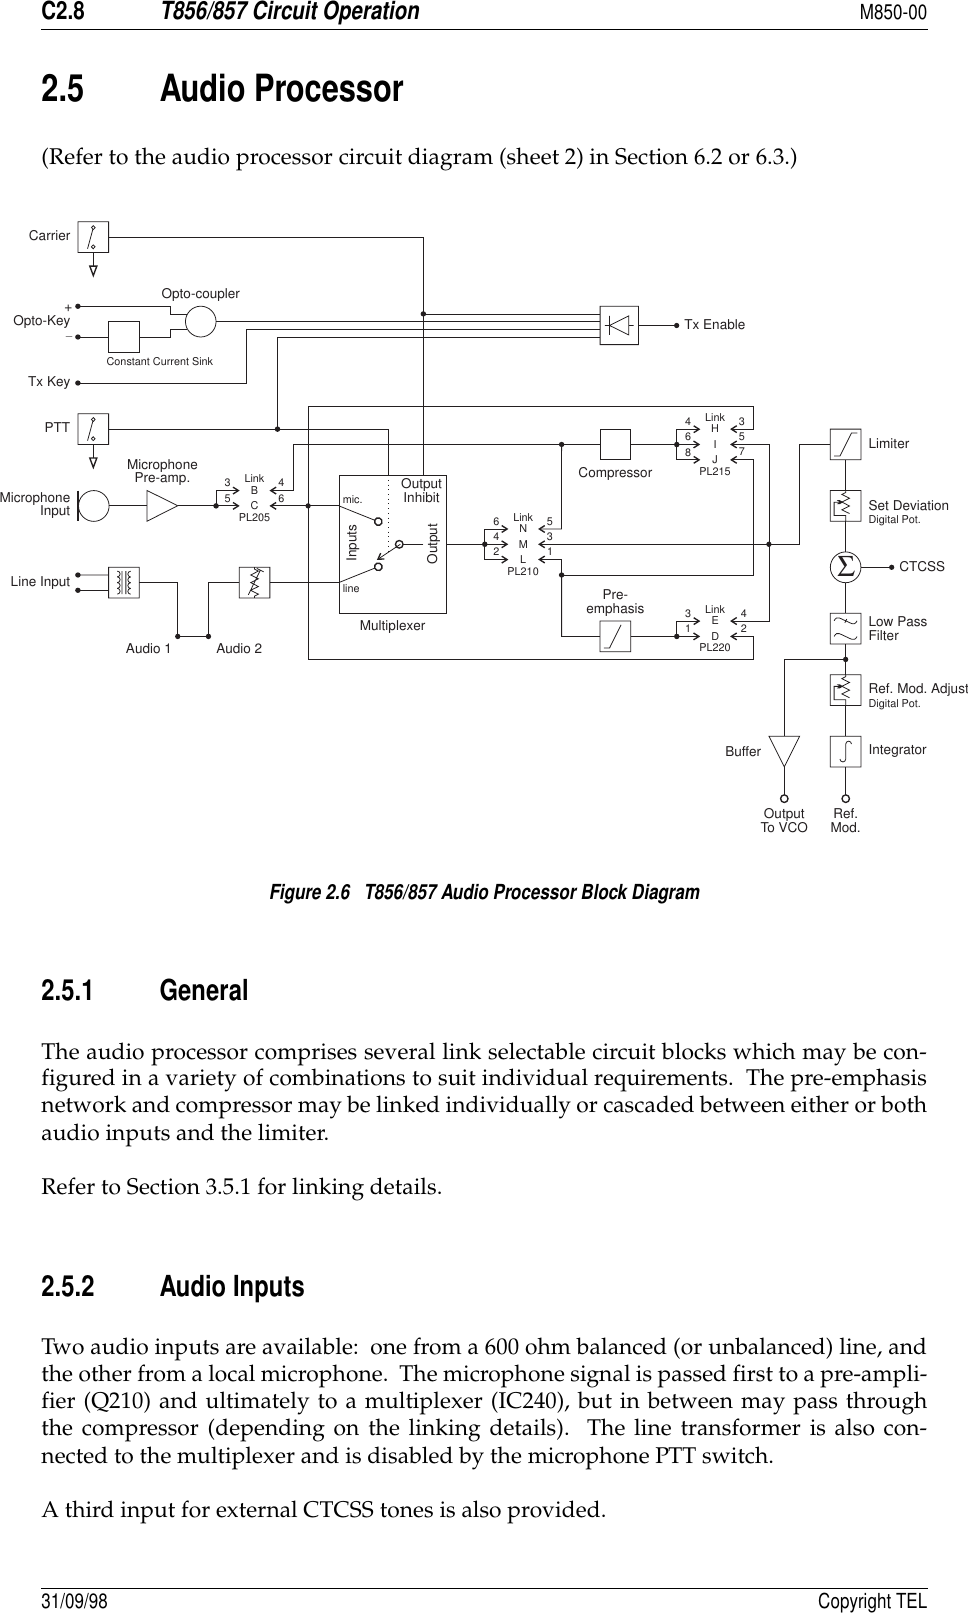 C2.8T856/857 Circuit OperationM850-0031/09/98 Copyright TEL2.5 Audio Processor(Refer to the audio processor circuit diagram (sheet 2) in Section 6.2 or 6.3.)Figure 2.6   T856/857 Audio Processor Block Diagram2.5.1 GeneralThe audio processor comprises several link selectable circuit blocks which may be con-figured in a variety of combinations to suit individual requirements.  The pre-emphasisnetwork and compressor may be linked individually or cascaded between either or bothaudio inputs and the limiter.Refer to Section 3.5.1 for linking details.2.5.2 Audio InputsTwo audio inputs are available:  one from a 600 ohm balanced (or unbalanced) line, andthe other from a local microphone.  The microphone signal is passed first to a pre-ampli-fier (Q210) and ultimately to a multiplexer (IC240), but in between may pass throughthe compressor (depending on the linking details).  The line transformer is also con-nected to the multiplexer and is disabled by the microphone PTT switch.A third input for external CTCSS tones is also provided.Pre-emphasis346BC56434253357128NHMIELJD461mic.lineMultiplexerInputsOutputOutputInhibitAudio 1 Audio 2CompressorLinkLinkLinkTx EnableΣCarrierOpto-KeyTx KeyPTTMicrophoneInputLine InputMicrophonePre-amp.Opto-couplerLinkPL205PL215PL220PL210LimiterSet DeviationCTCSSLow PassFilterRef. Mod. AdjustIntegratorDigital Pot.Digital Pot.BufferOutputTo VCO Ref.Mod.Constant Current Sink+_